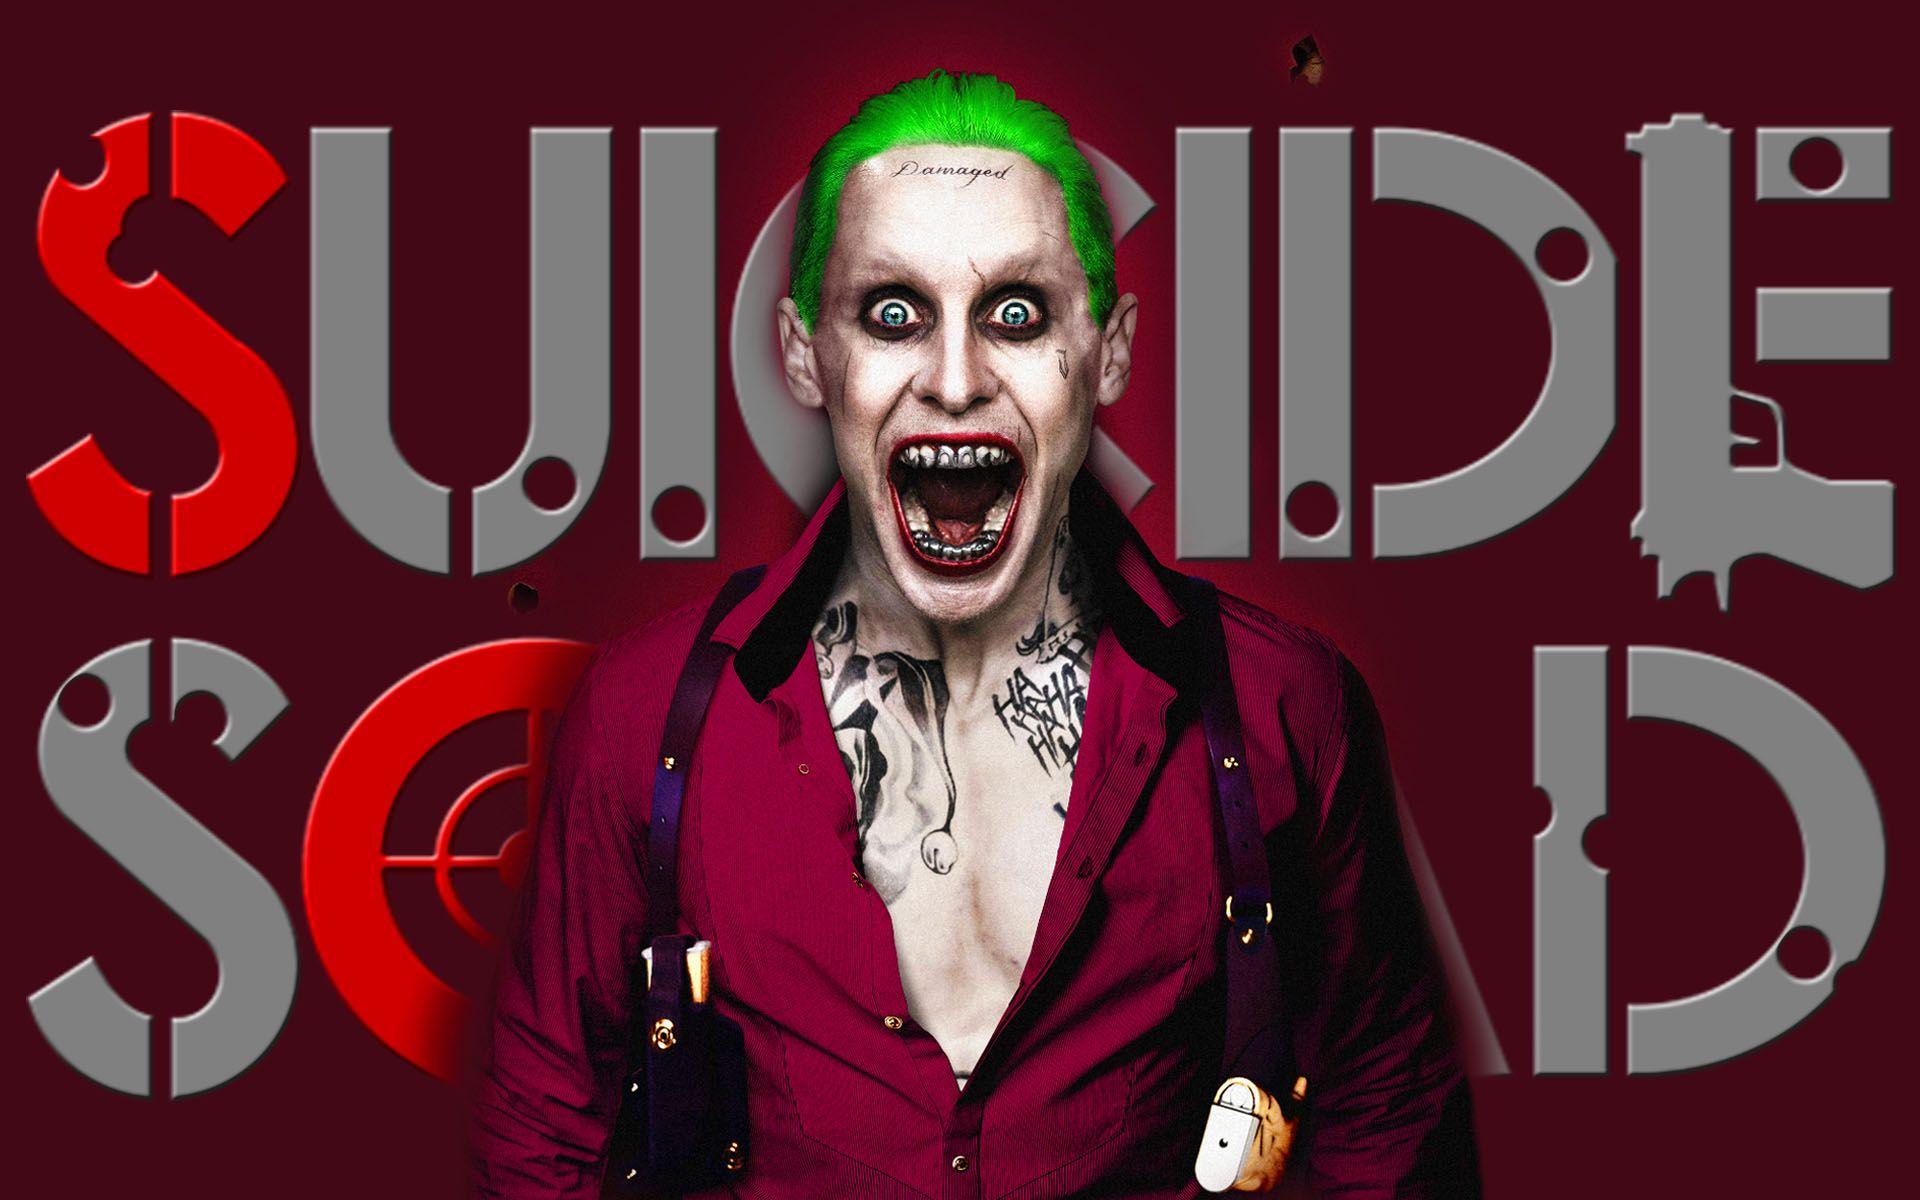 image about Suicide Squad. Jared leto